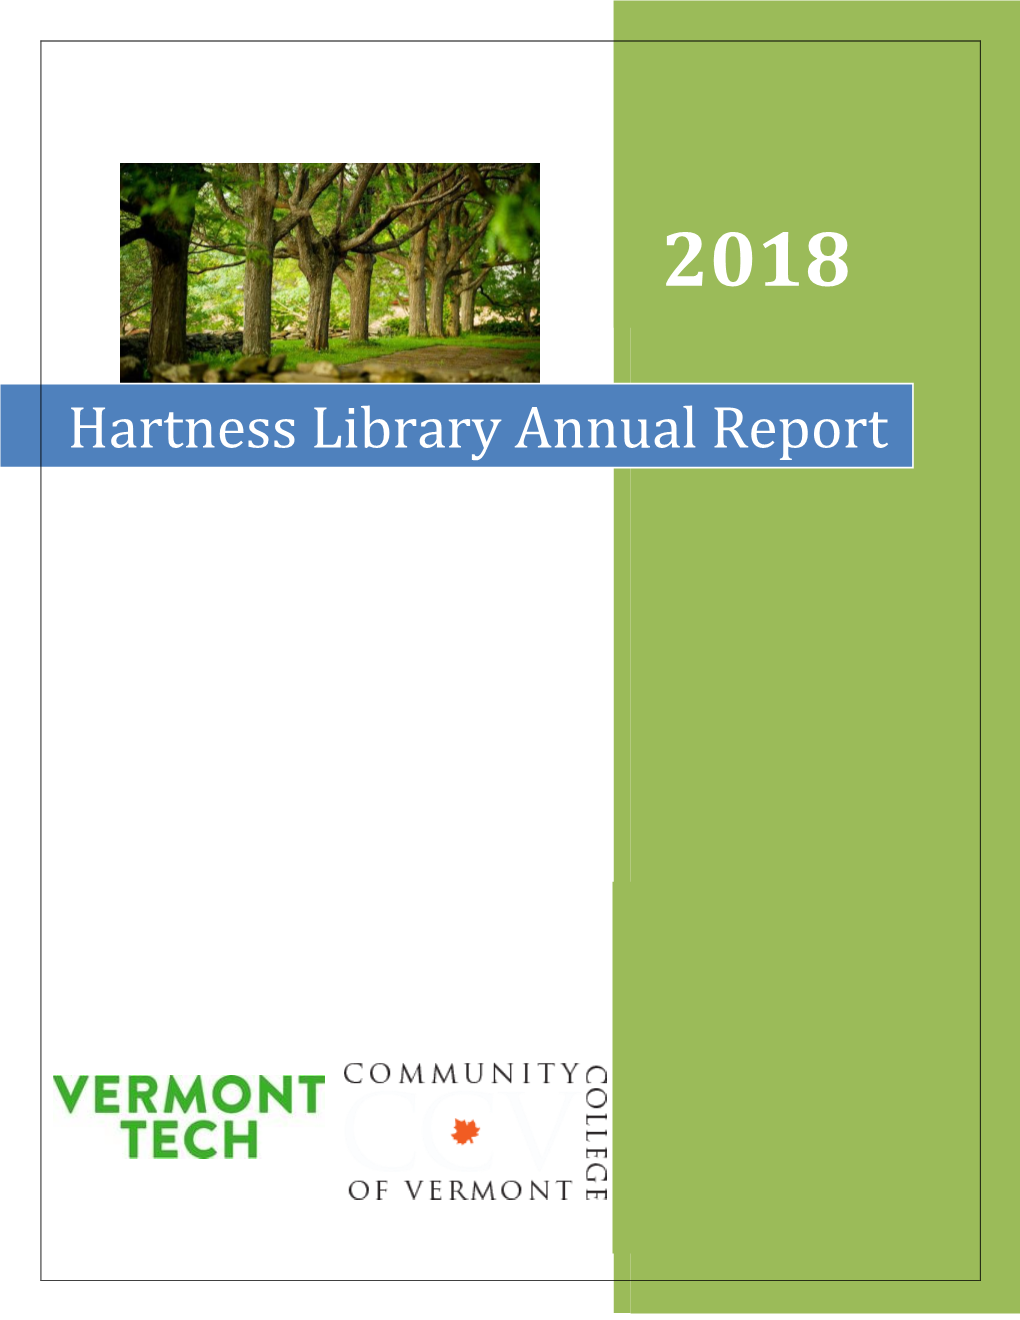 Hartness Library Annual Report